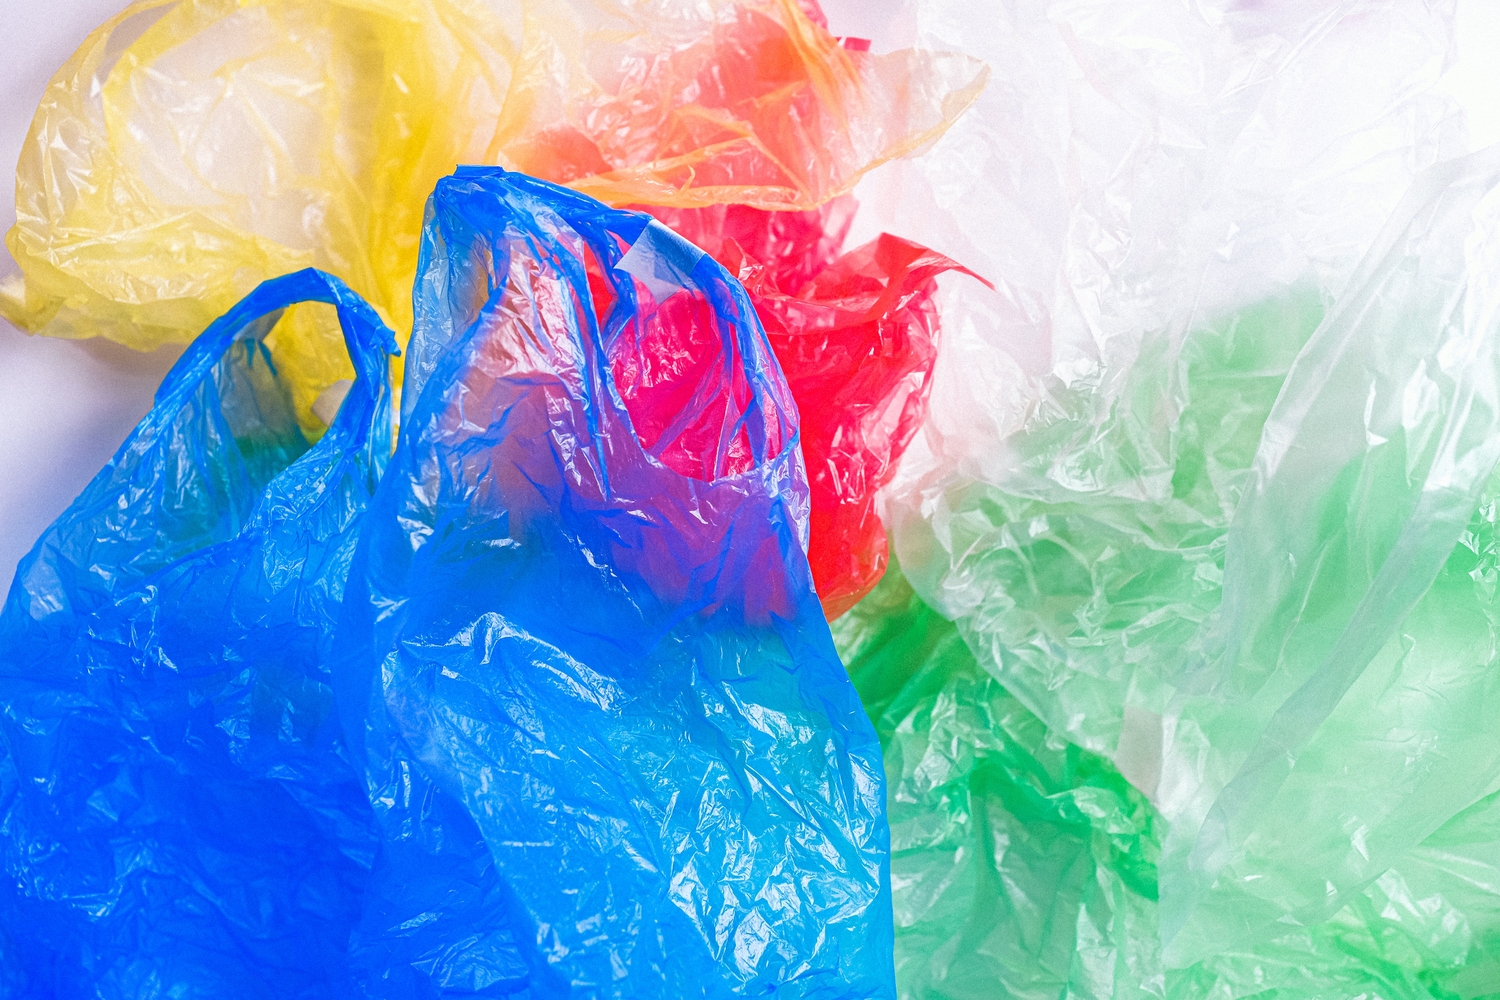 The story of pre- or post-consumer waste in plastic packaging